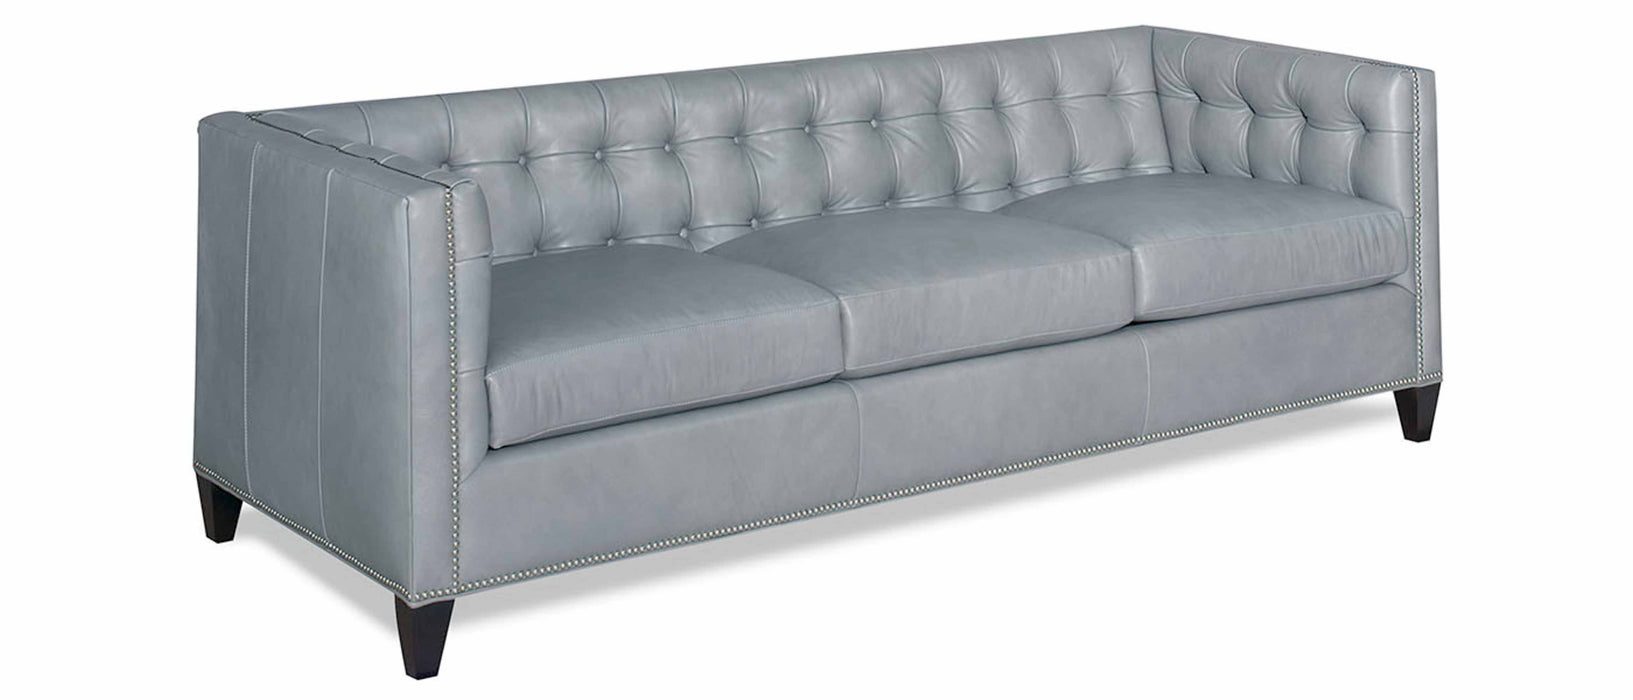 Lowery Leather Queen Size Sofa Sleeper